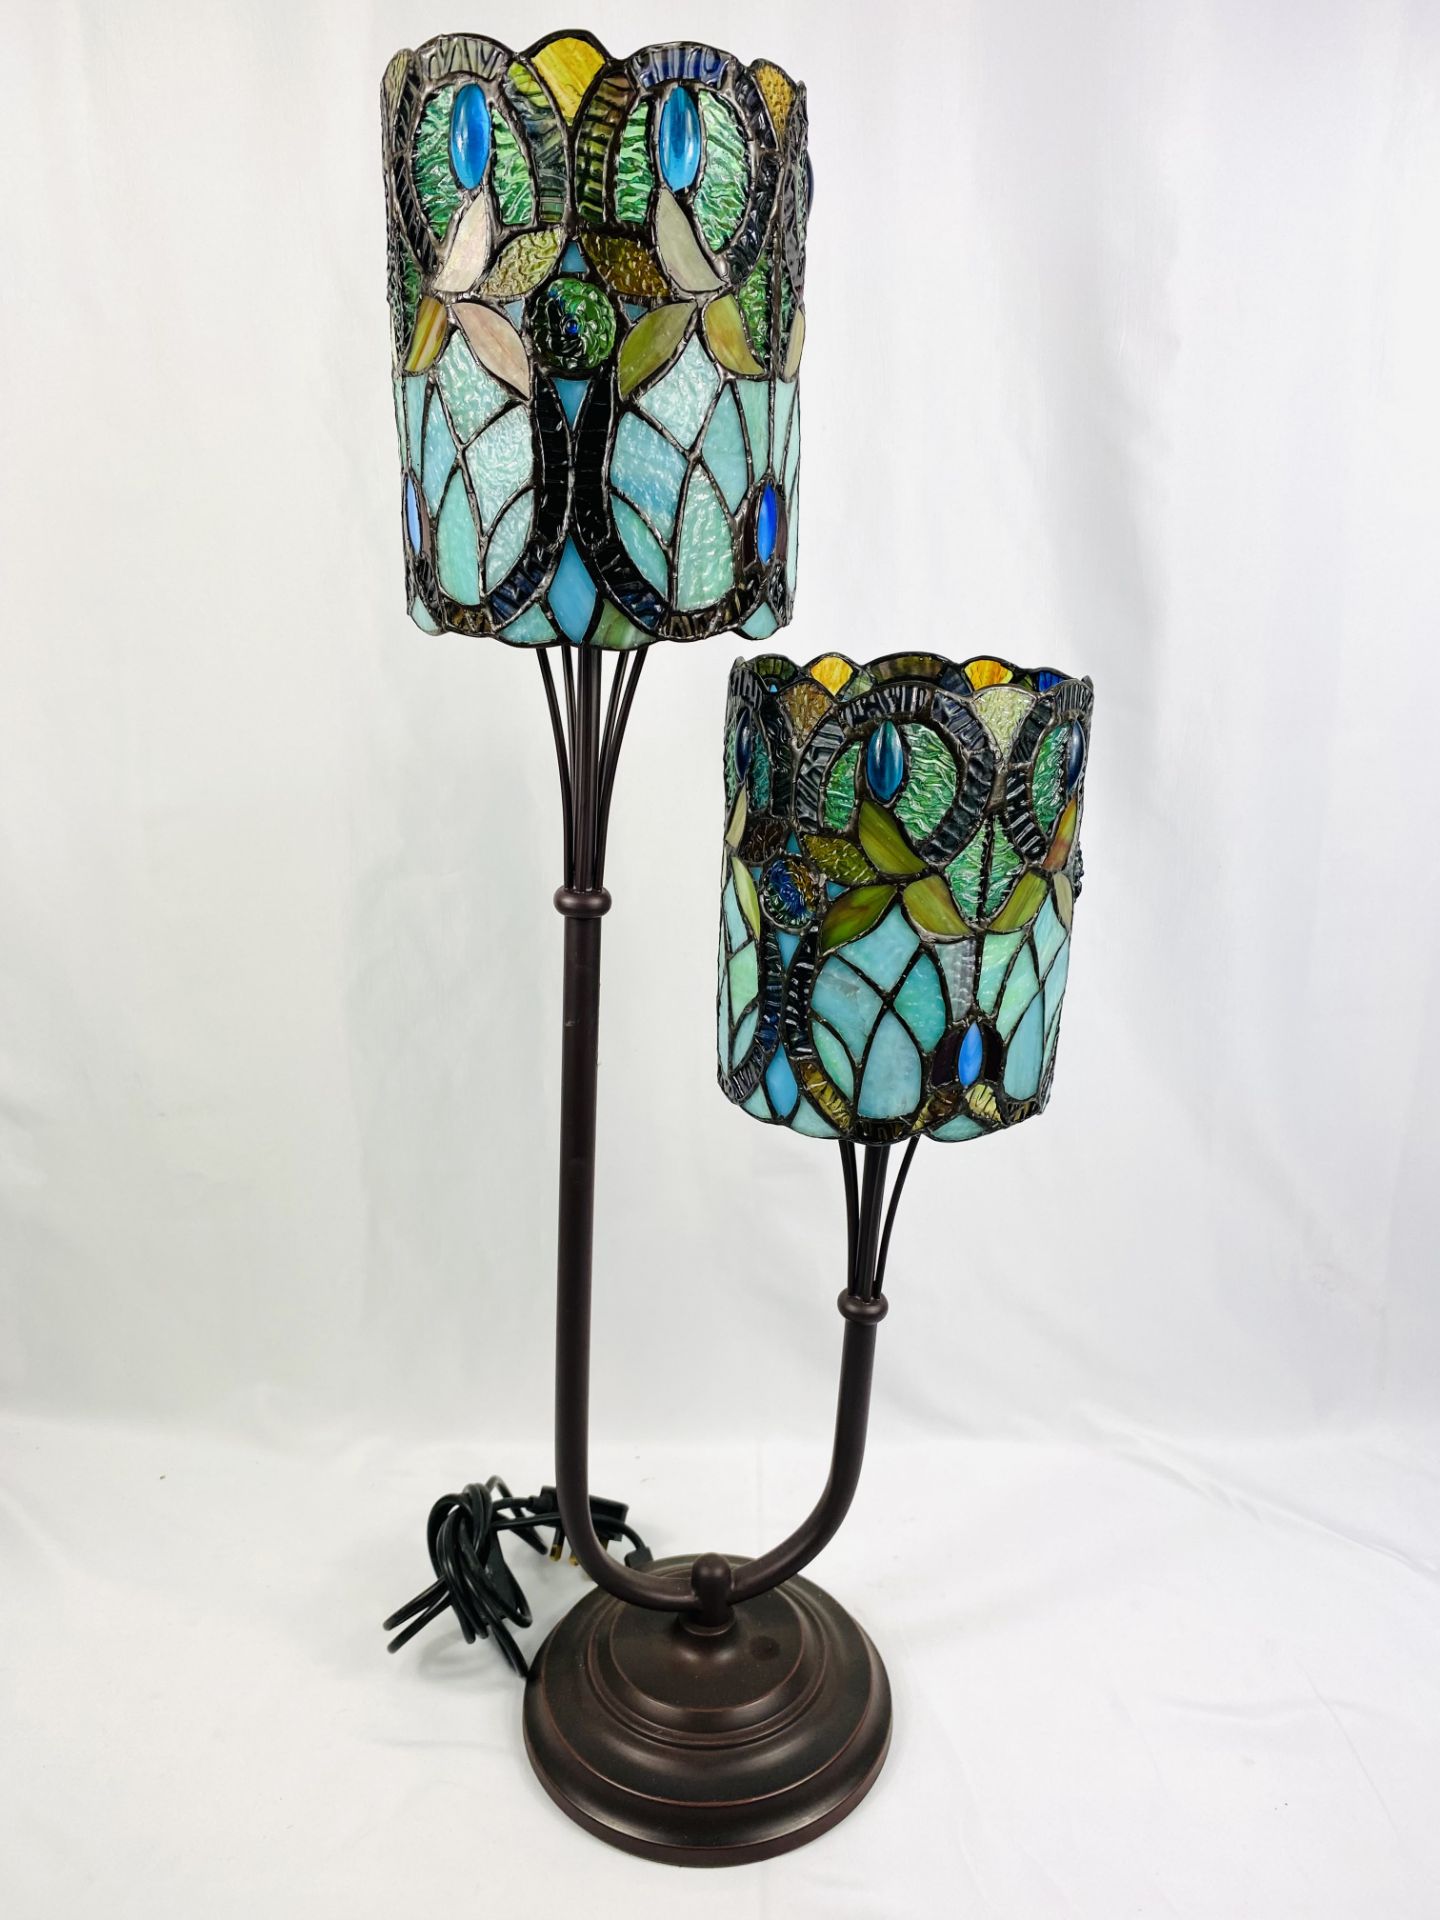 Tiffany style two branch table lamp